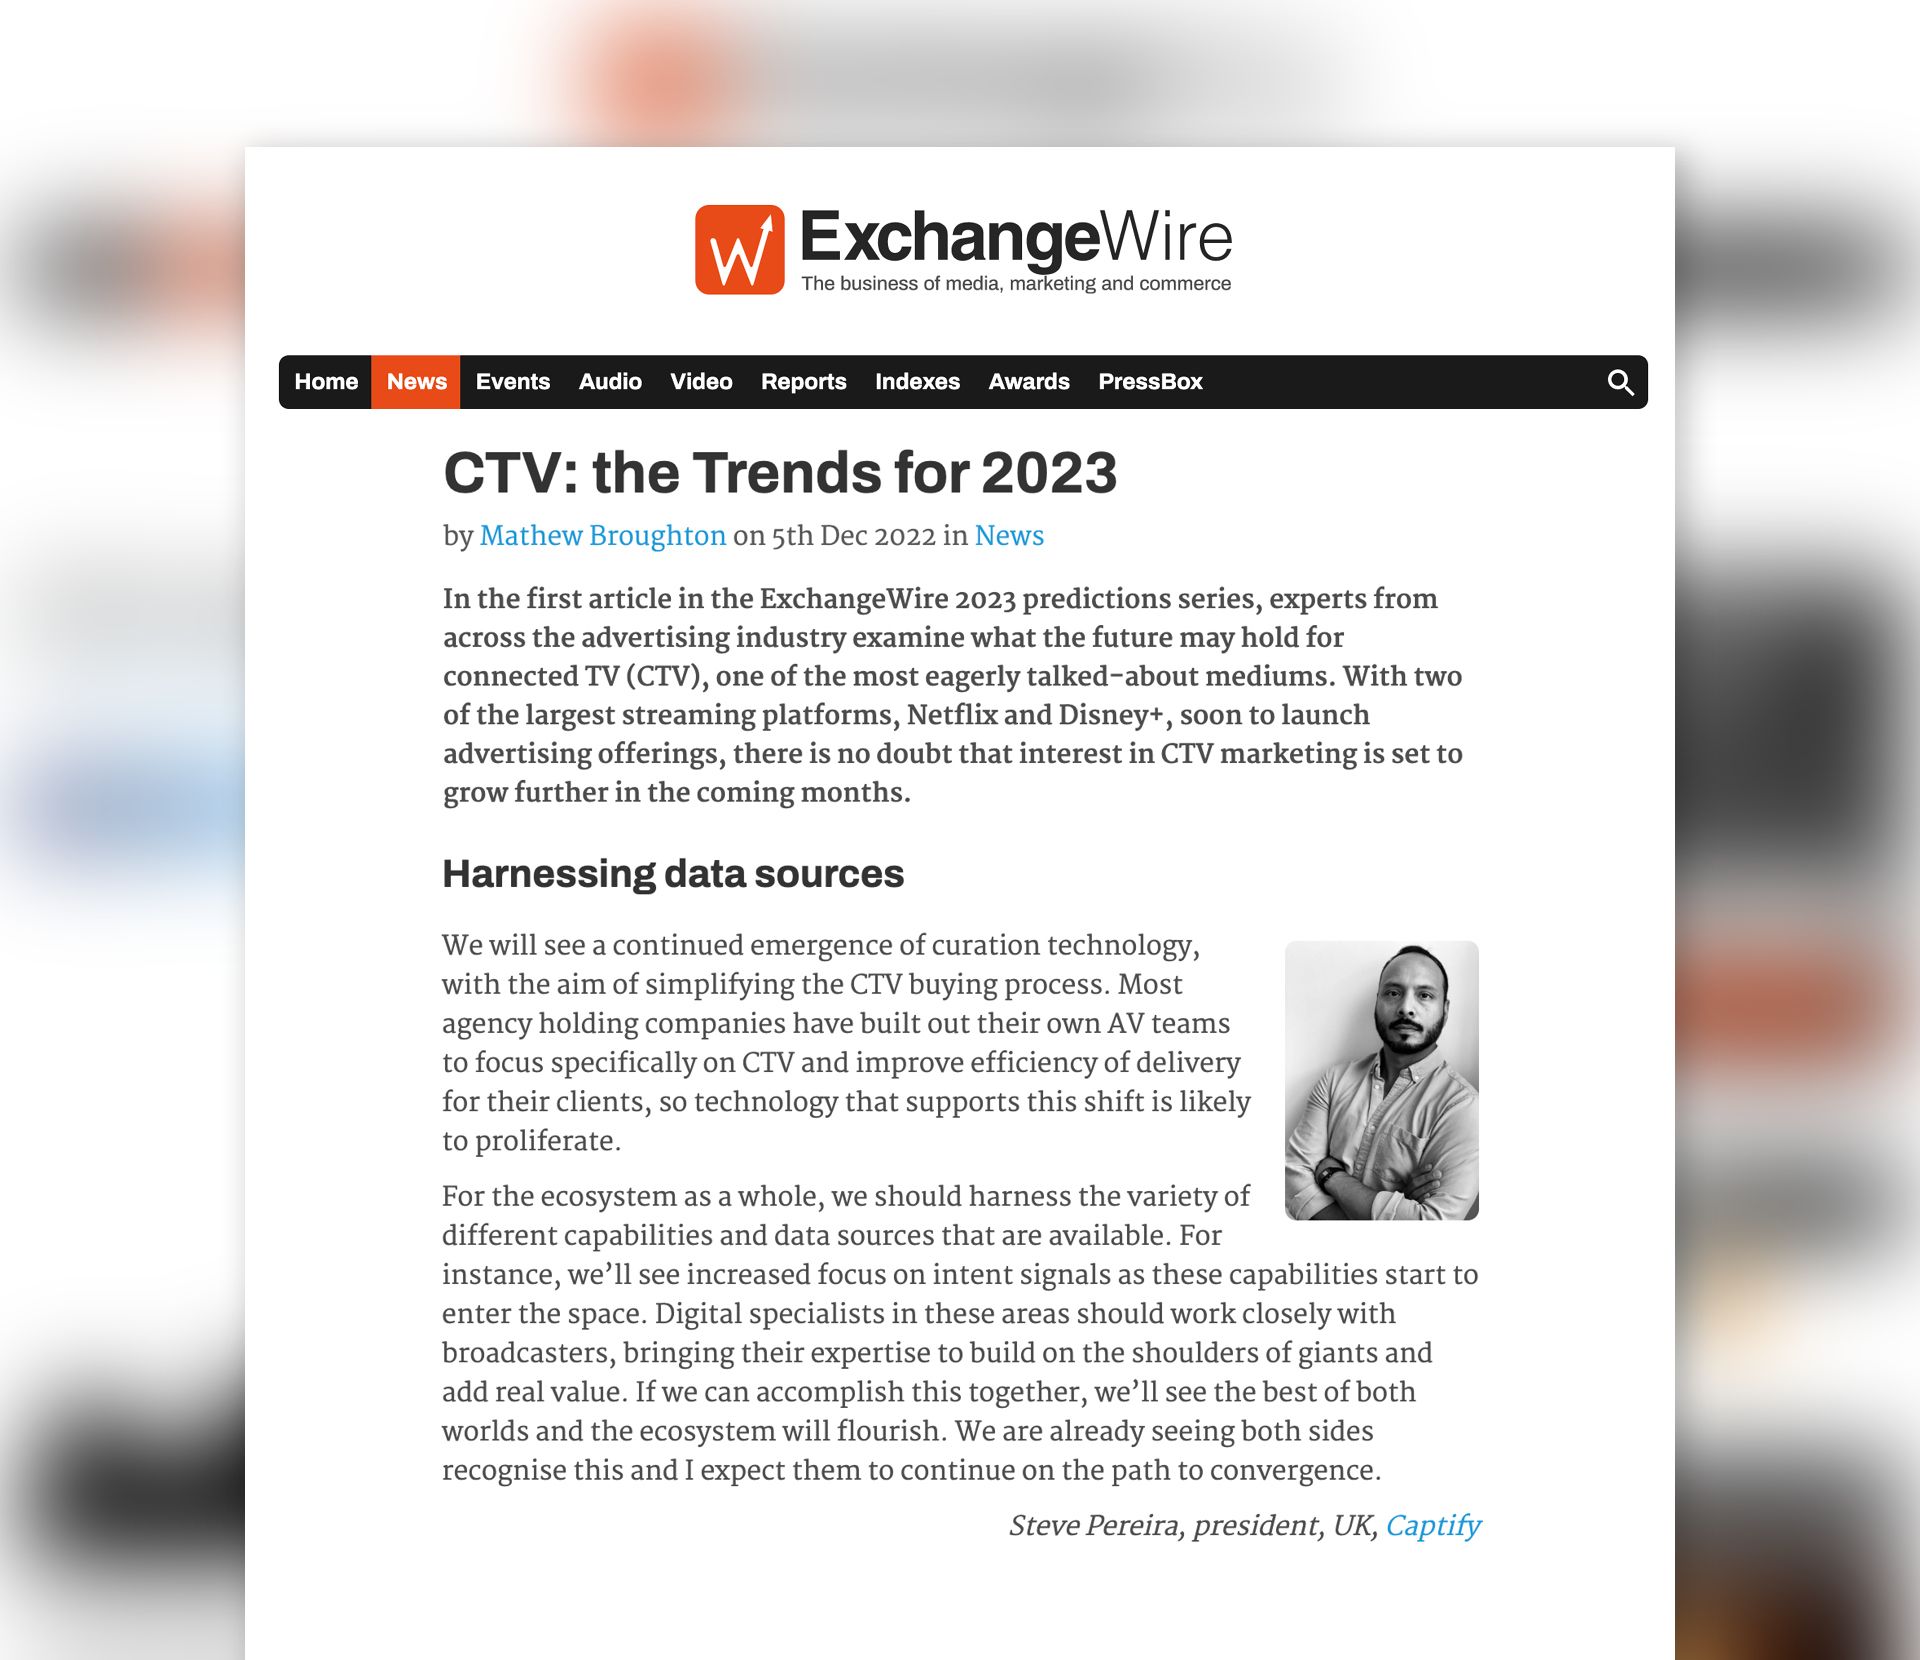 ExchangeWire: CTV— The Trends For 2023